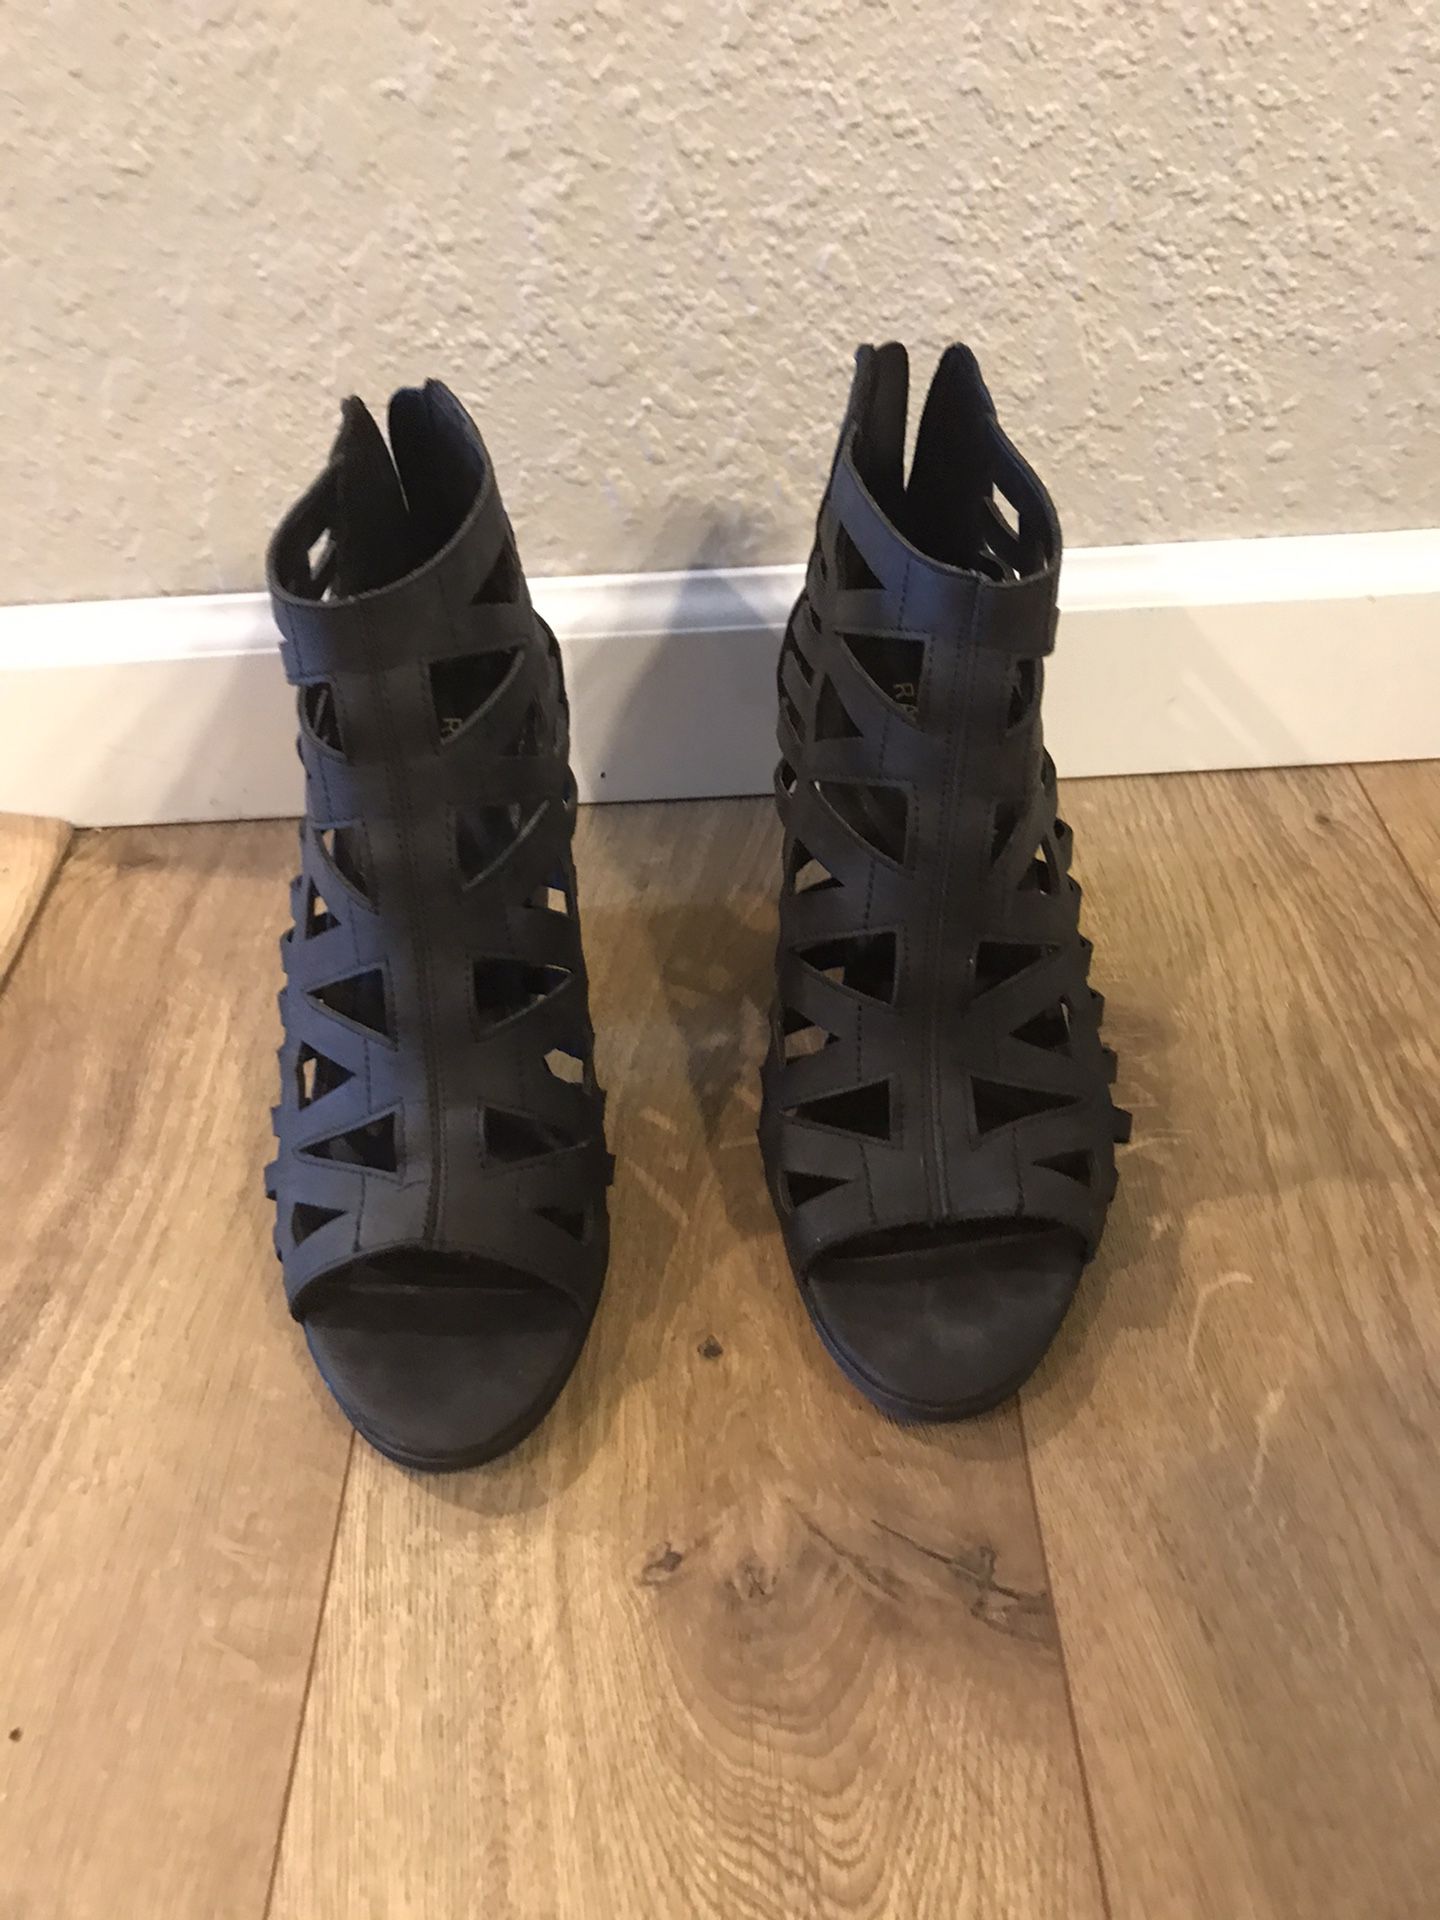 Rampage Heeled Sandals size 7.5